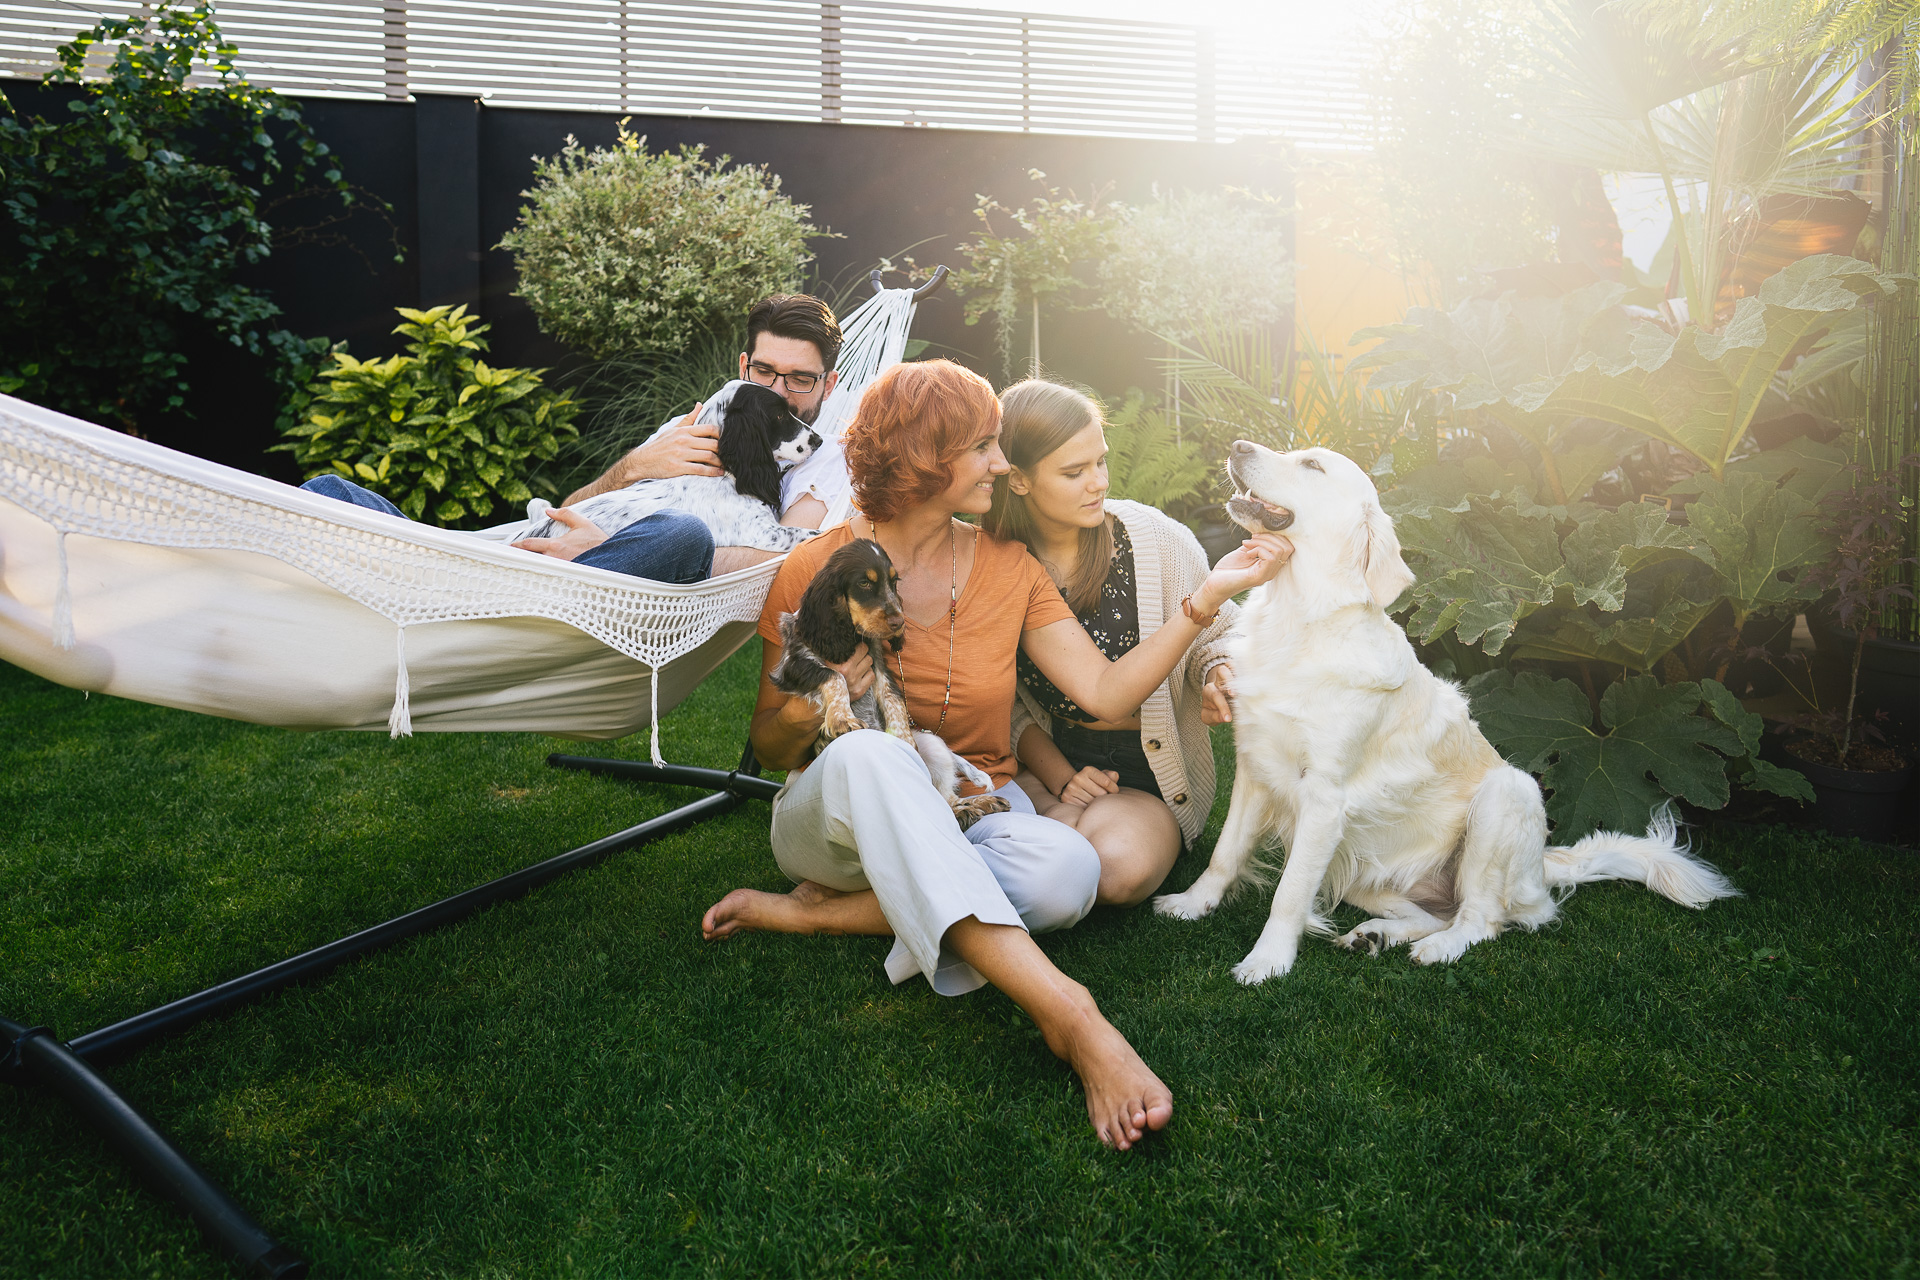 A family relaxing with their dogs, sitting on grass and a hammock in a beautiful garden